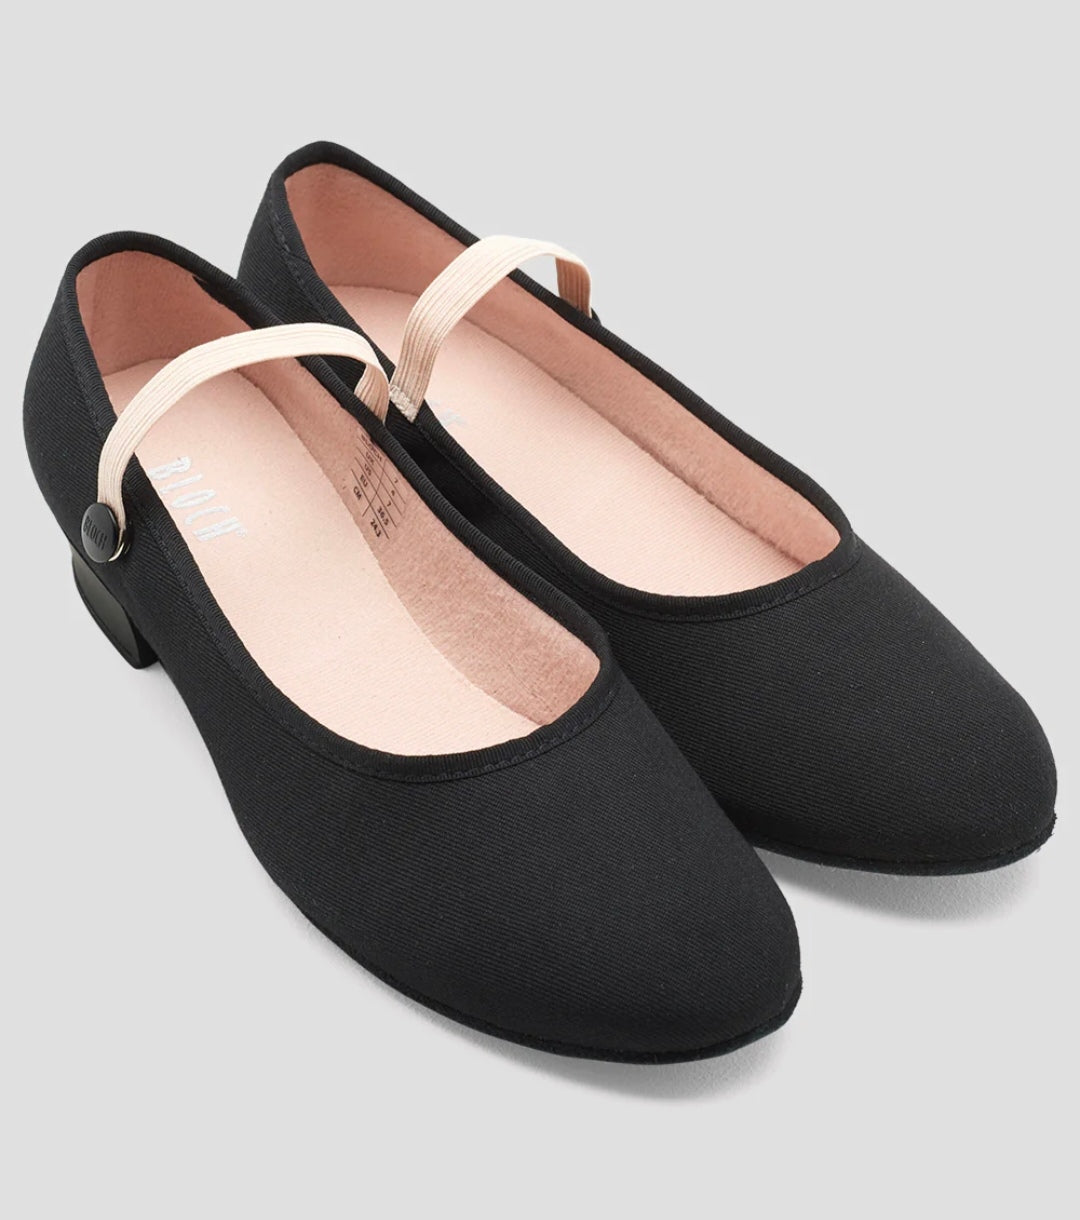 Bloch Accent low heel character shoes